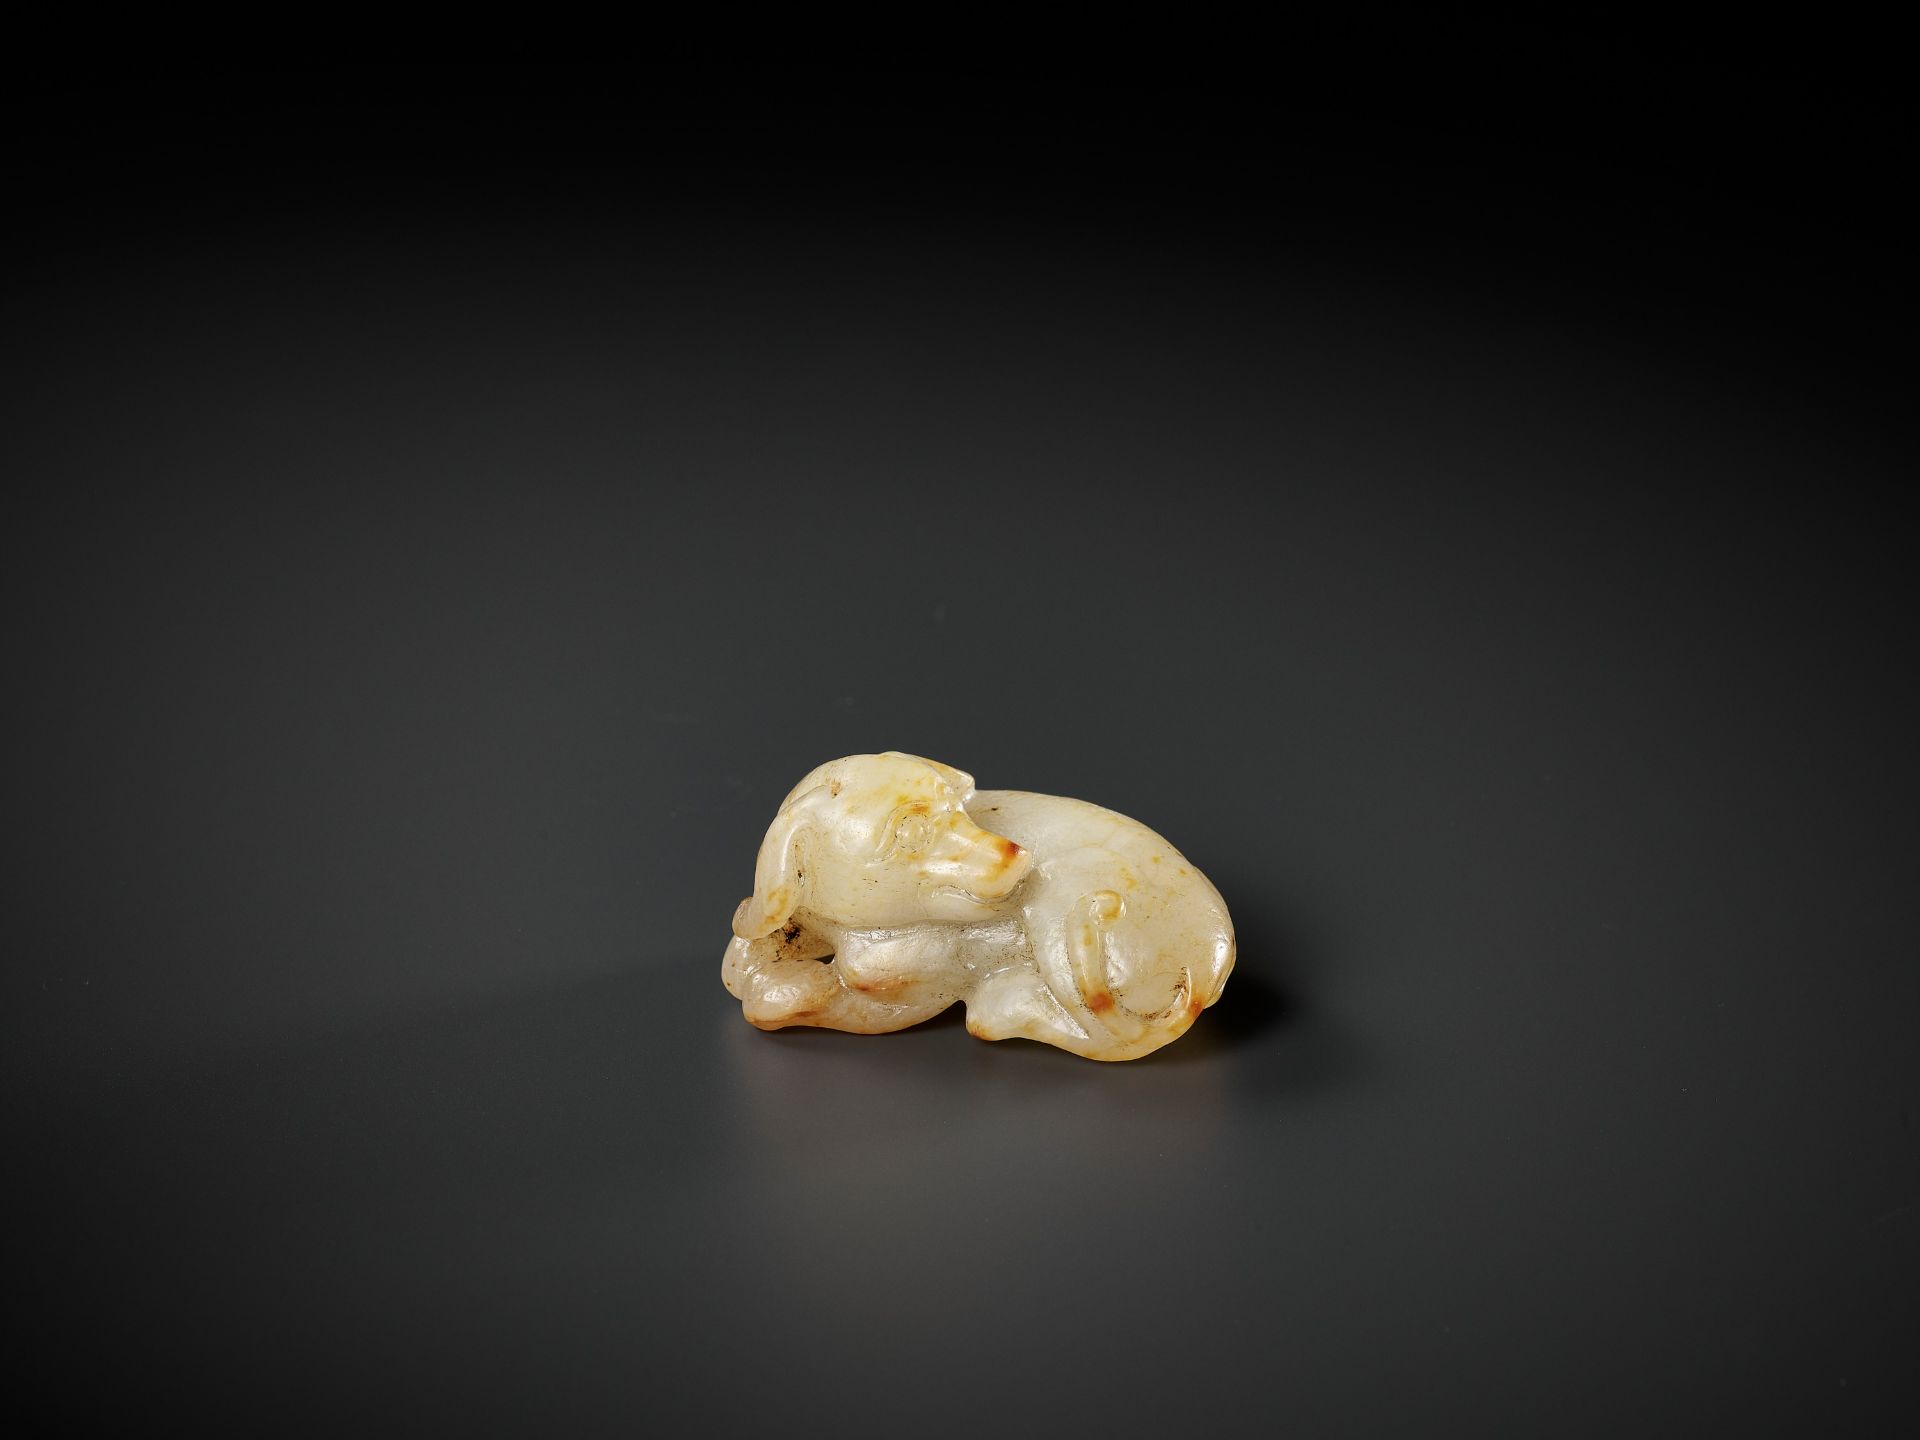 A PALE CELADON AND RUSSET JADE FIGURE OF A DOG, 17TH-18TH CENTURY - Image 2 of 10